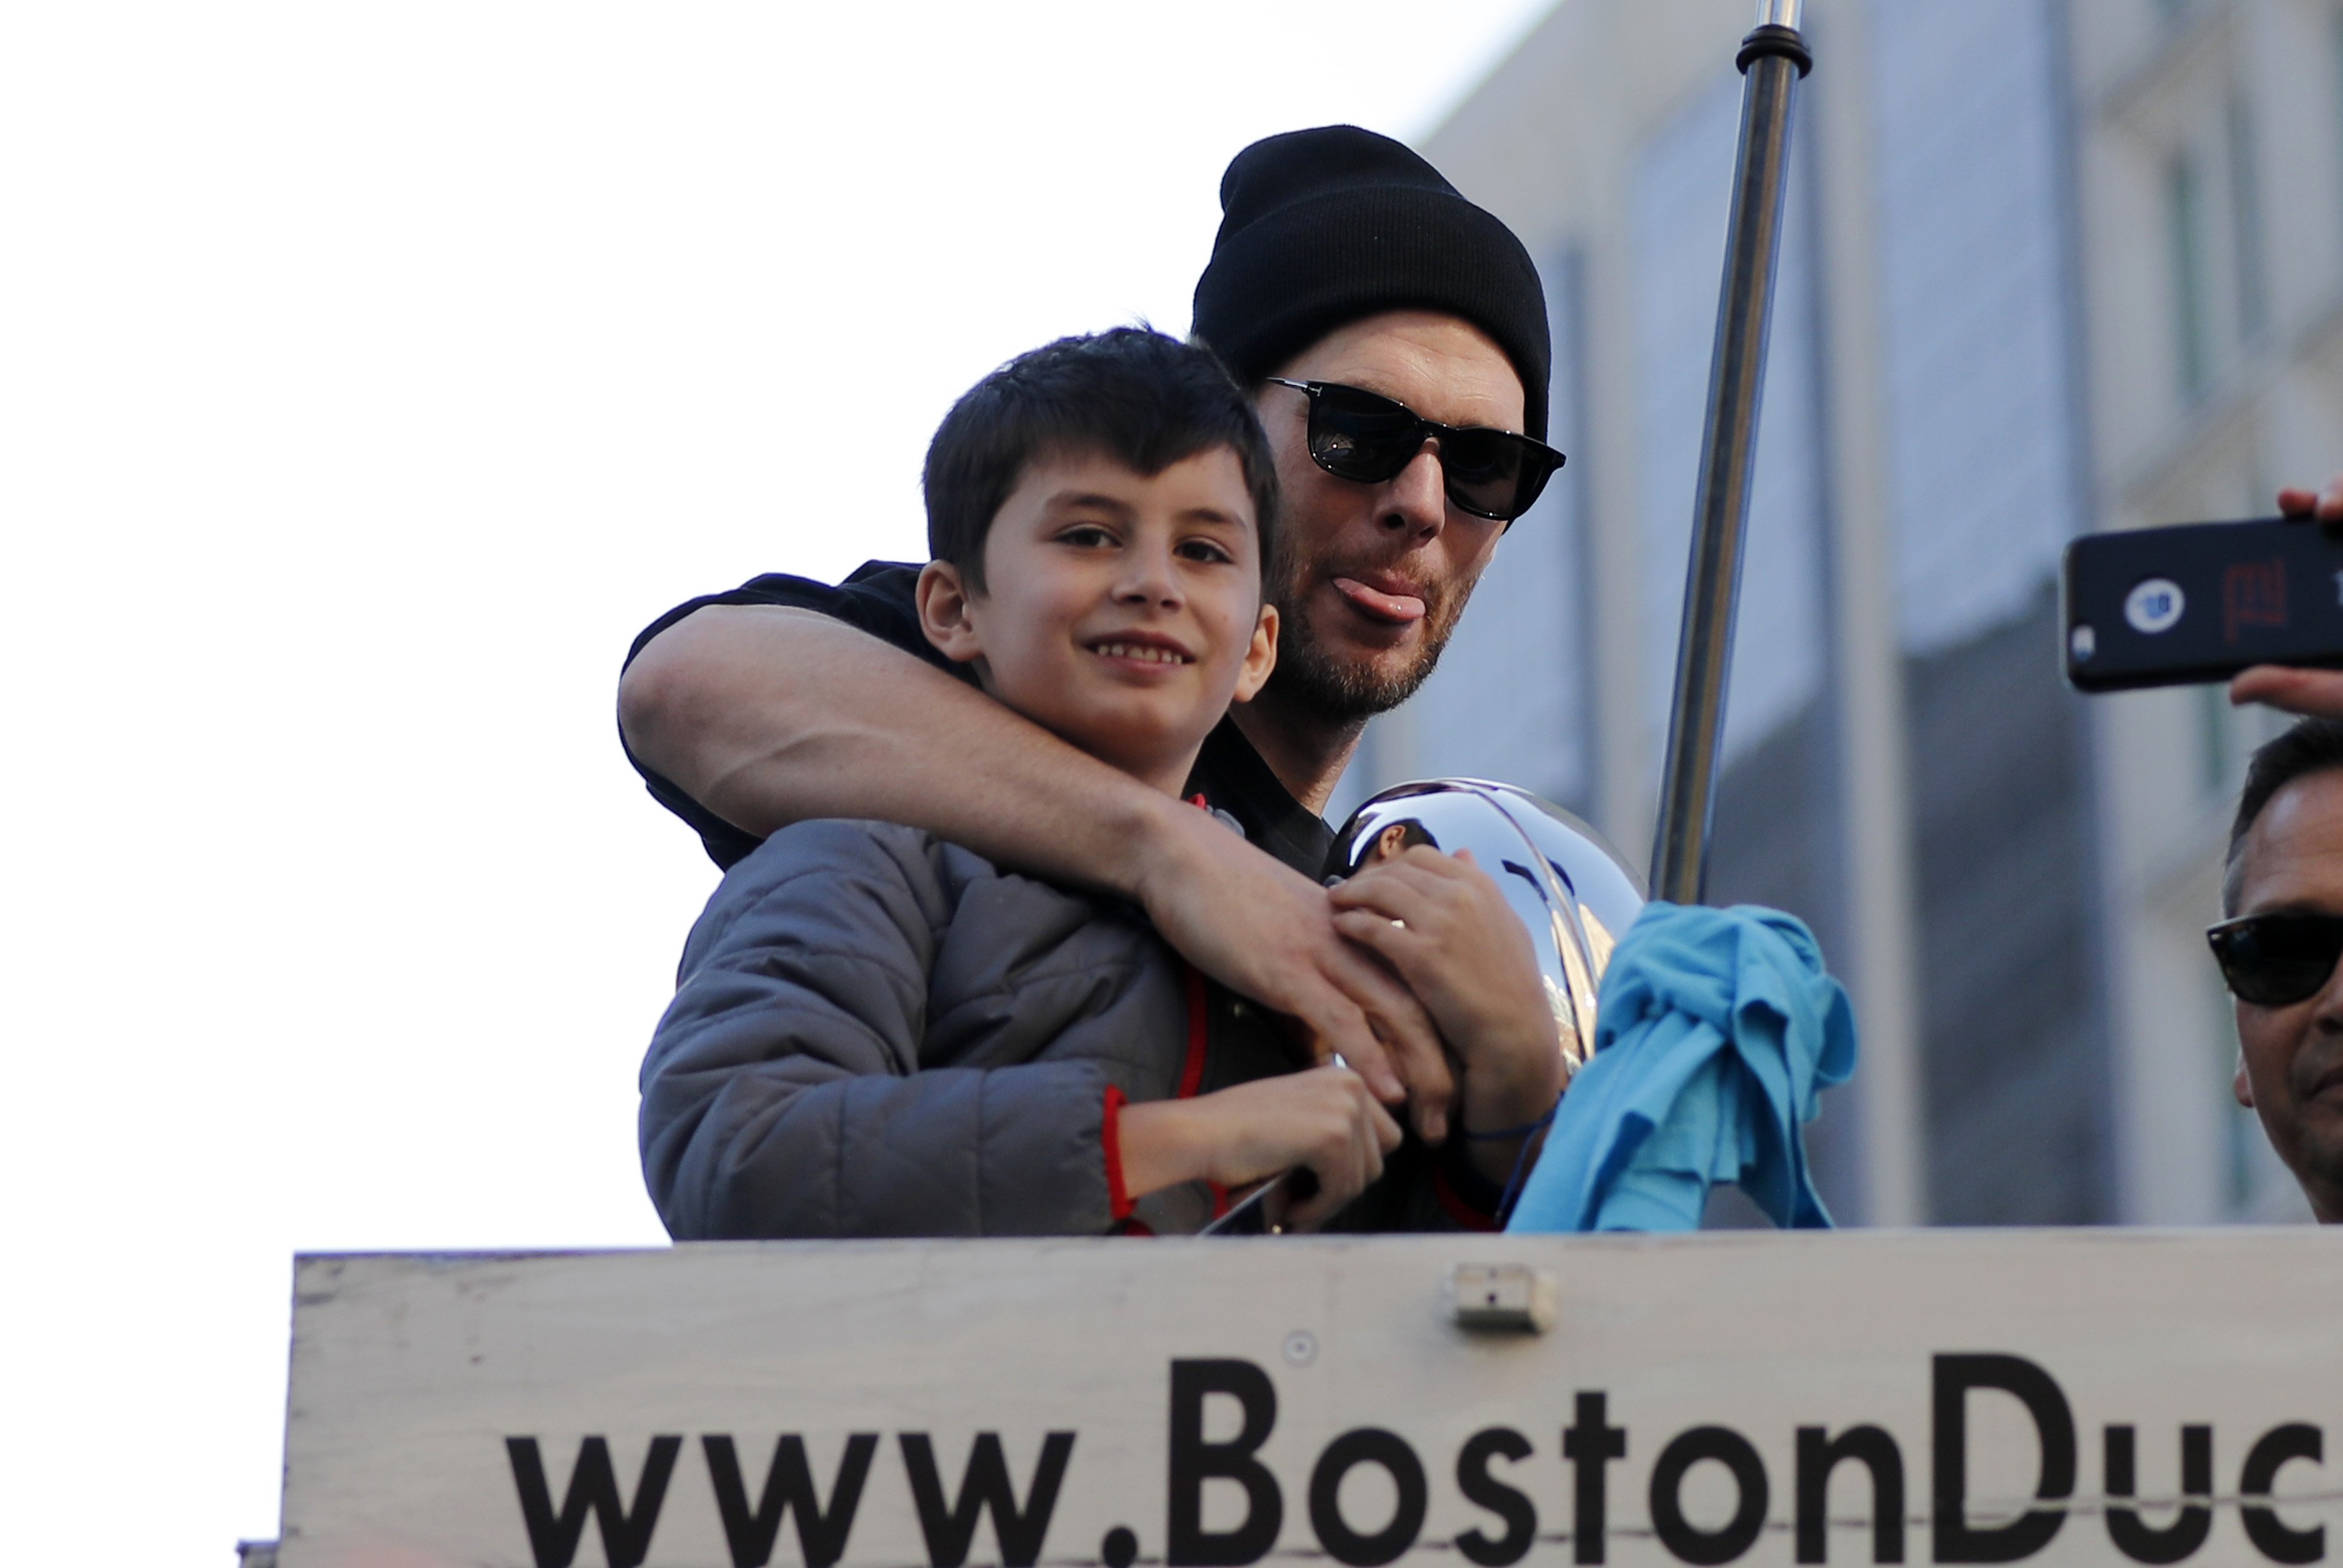 New England Patriots quarterback Tom Brady (12) poses with son Benjamin during the New England Patriots Super Bowl Victory Parade on February 5. 2019, through the streets of Boston, Massachusetts. | Source: Getty Images